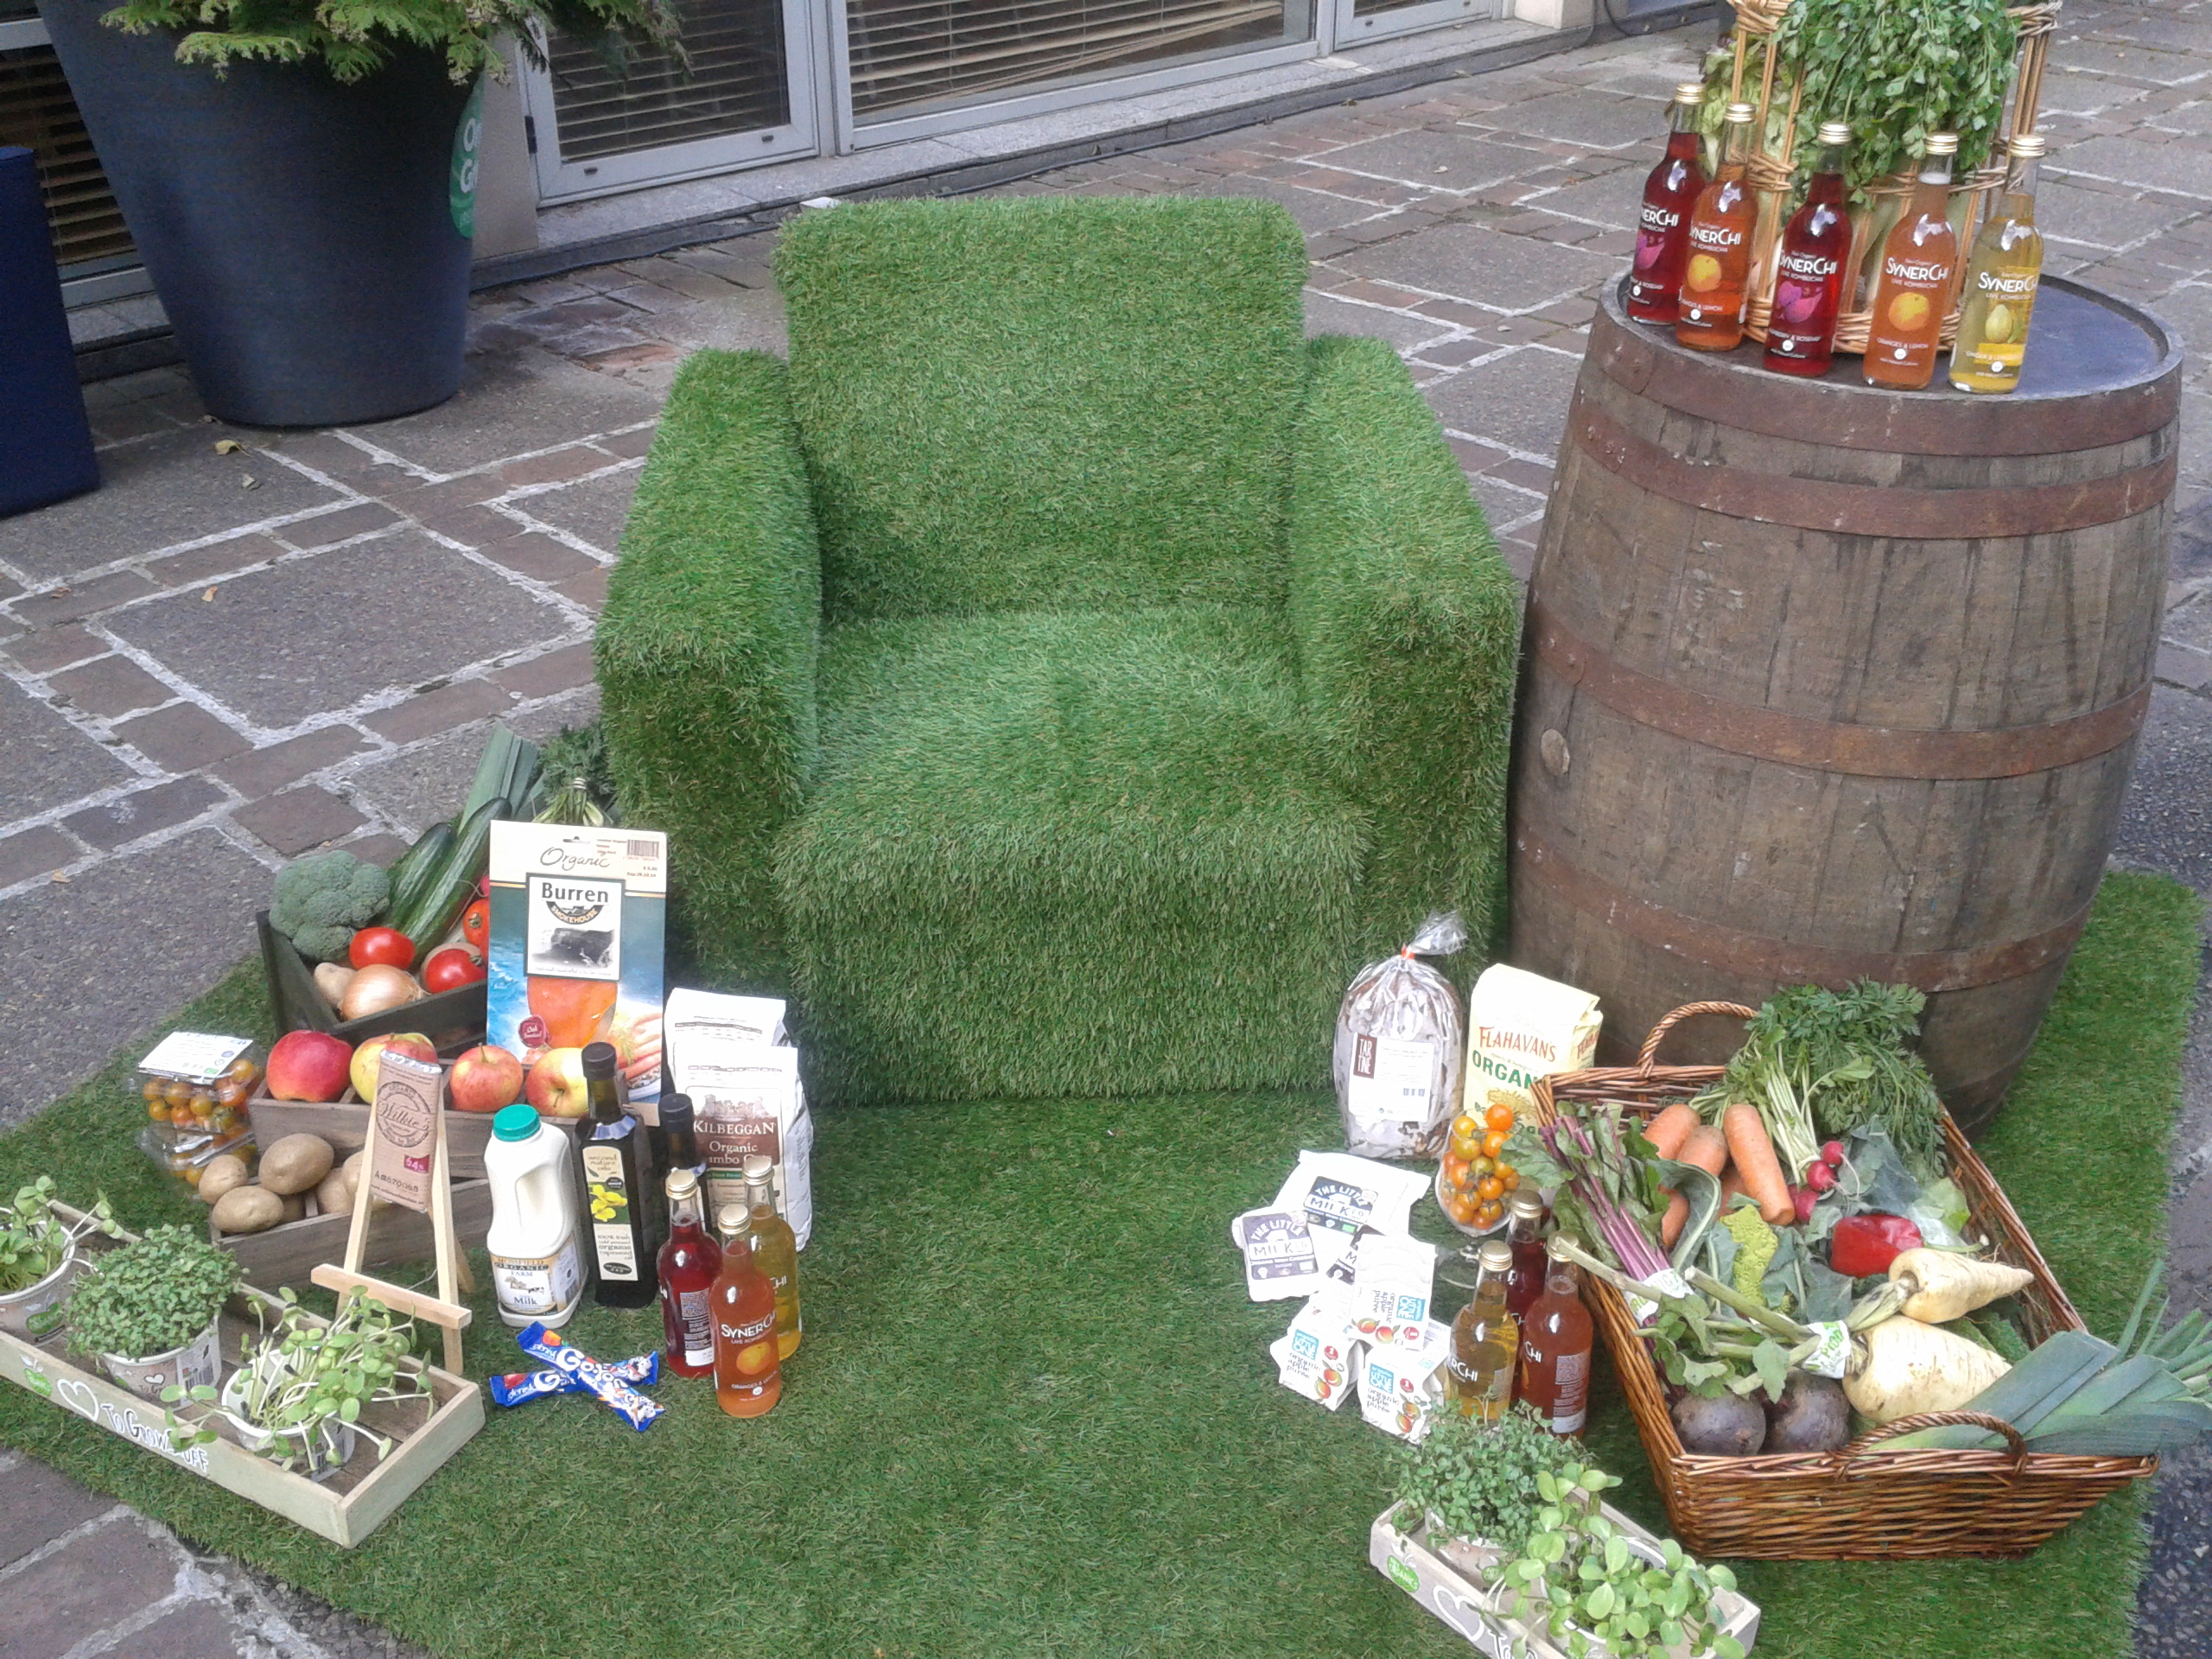 A selection of tasty, organic produce on display at the Bord Bia headquarters today to showcase the winners of the National Organic Awards 2014